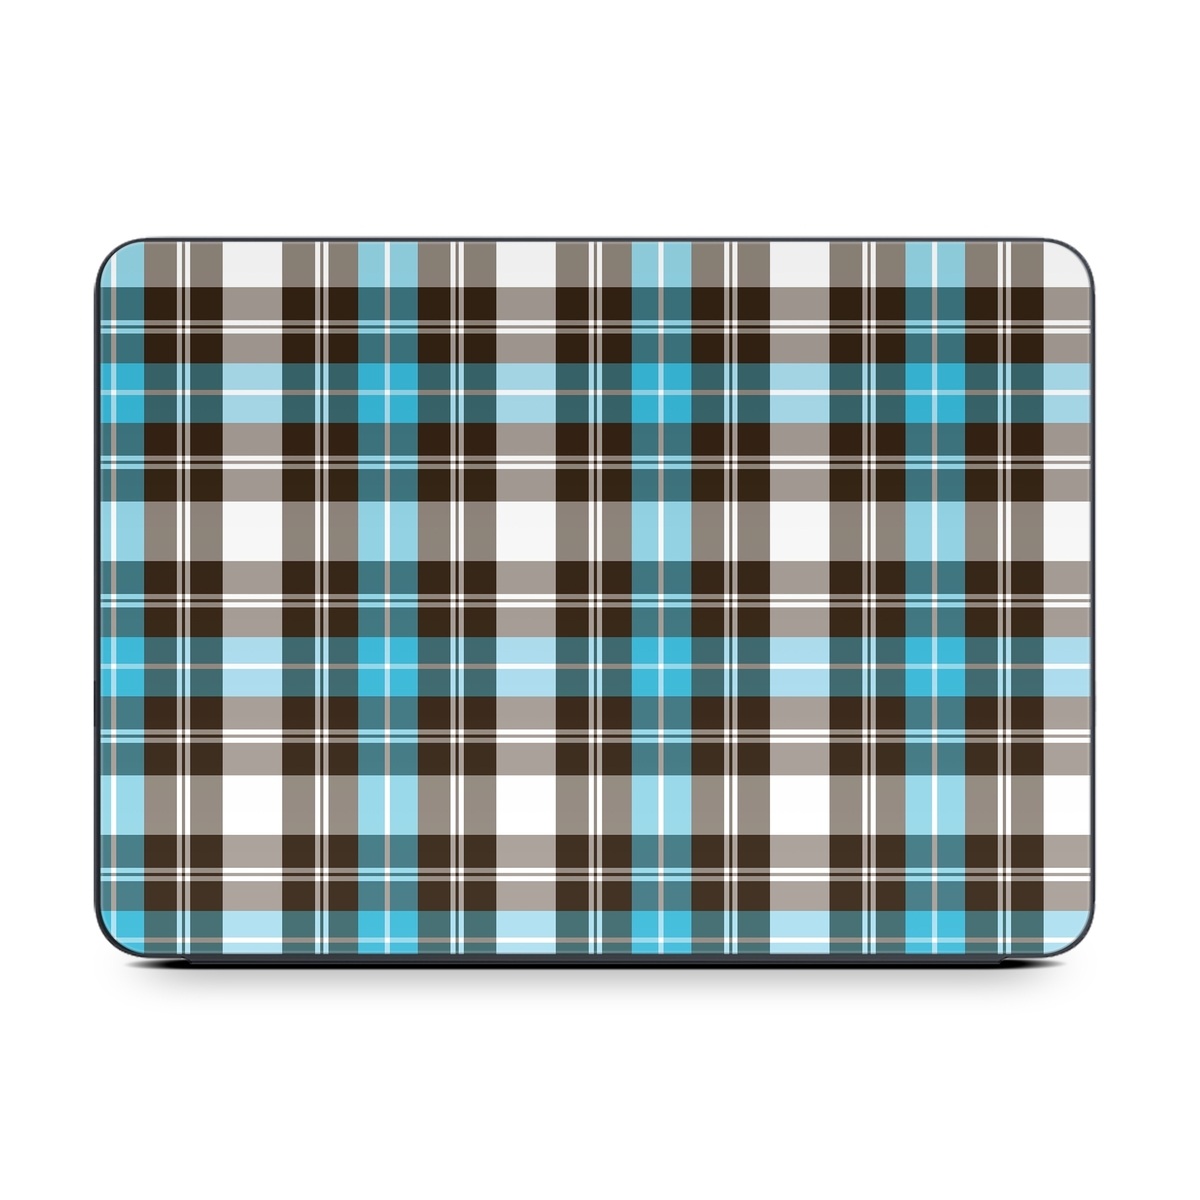 Smart Keyboard Folio for iPad Series Skin design of Plaid, Pattern, Tartan, Turquoise, Textile, Design, Brown, Line, Tints and shades, with gray, black, blue, white colors